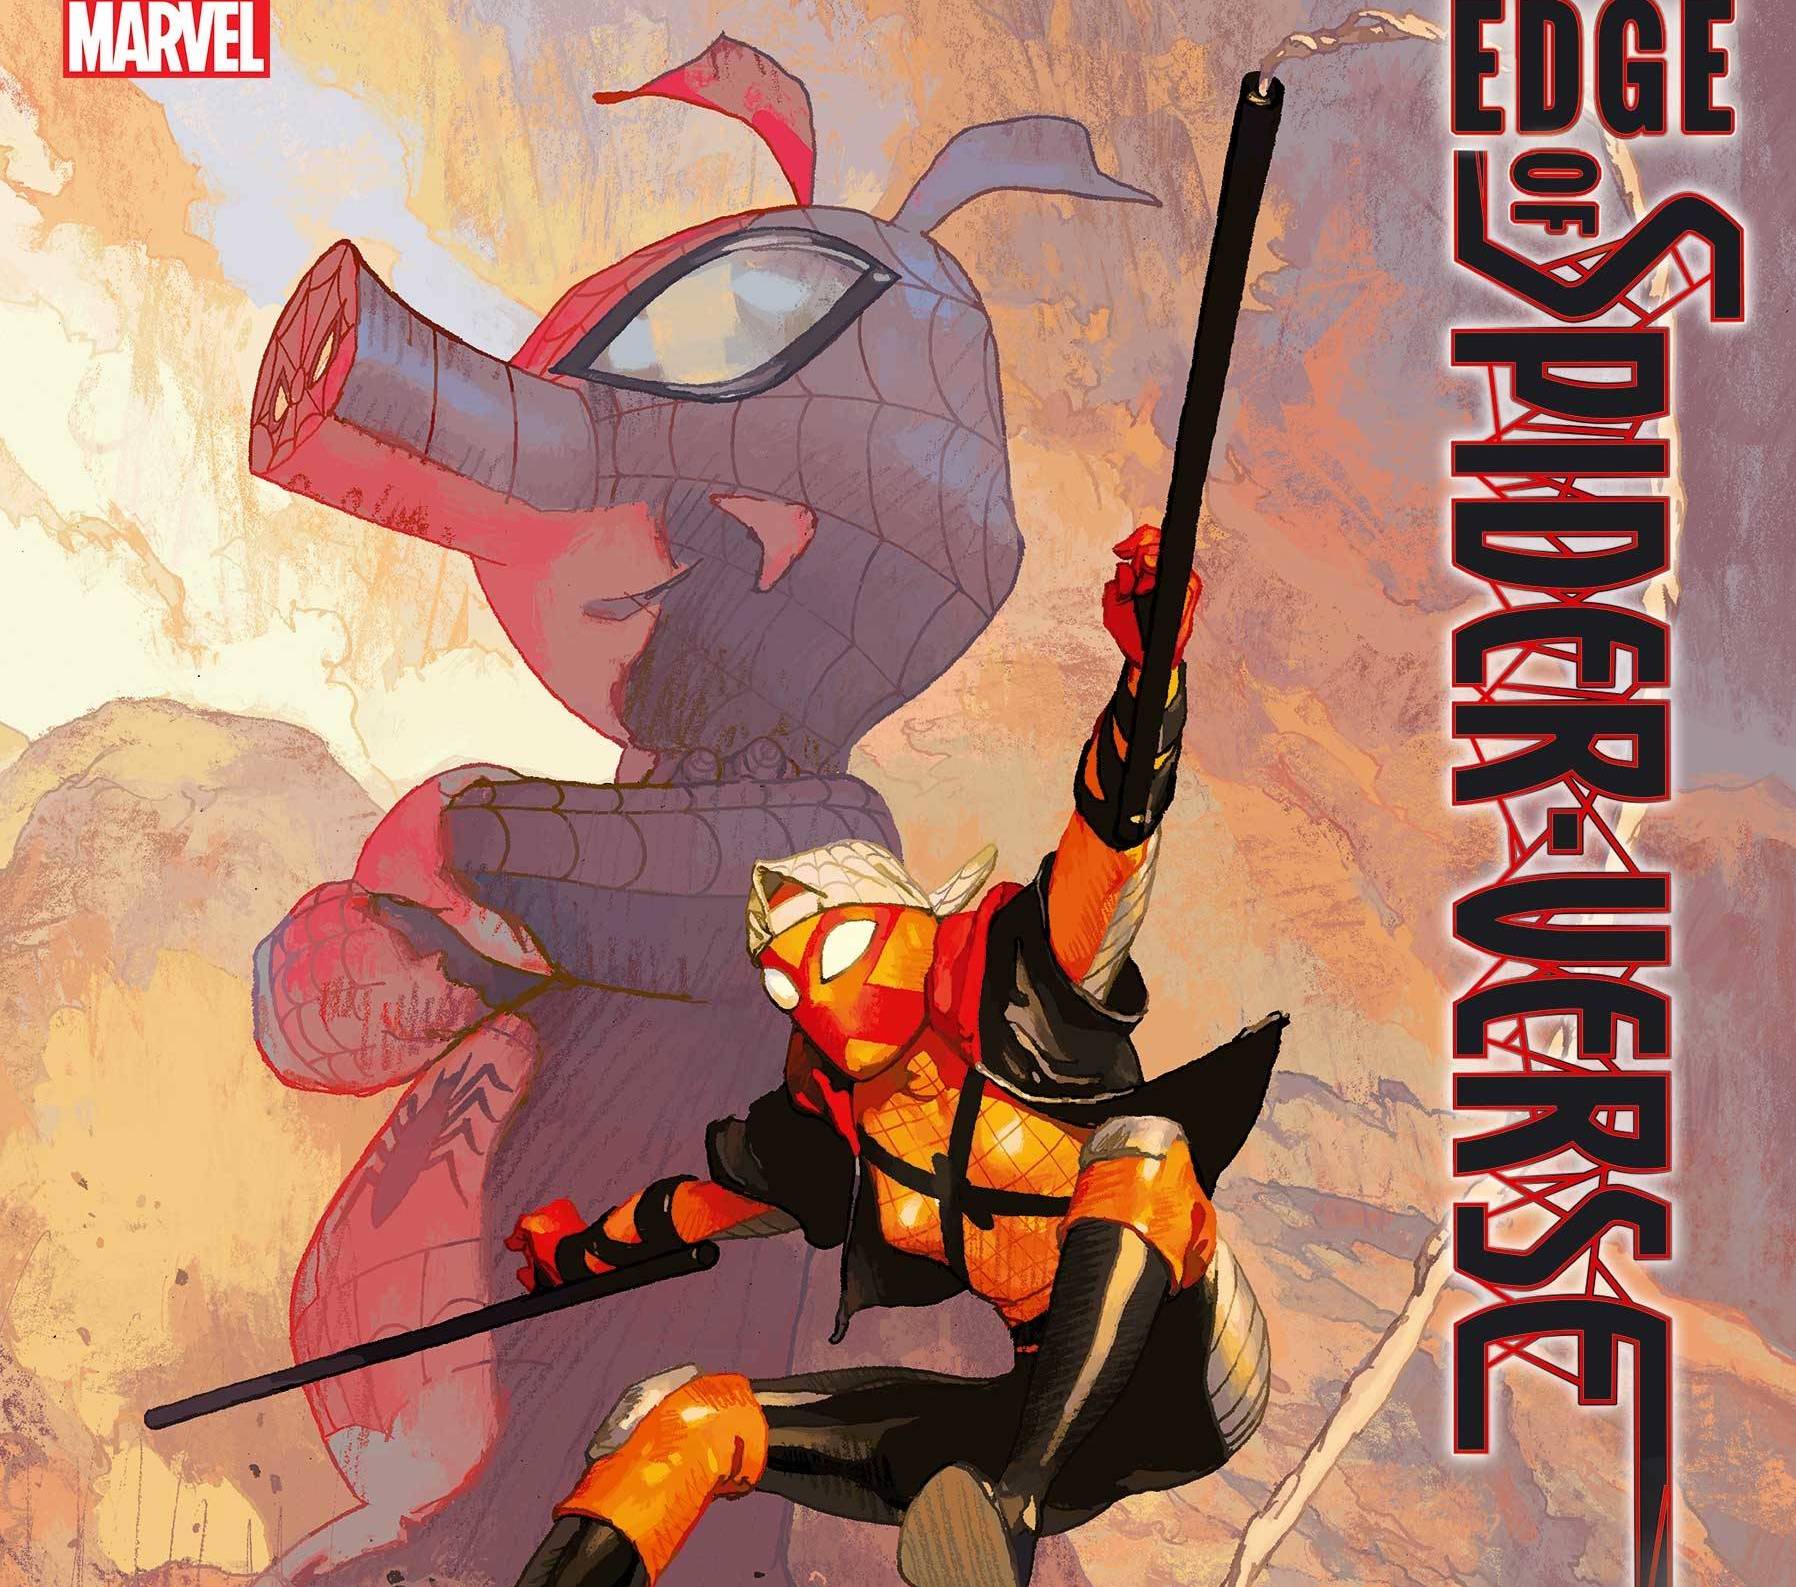 'Edge of Spider-Verse' #4 proves there's always more great Spidey characters to explore